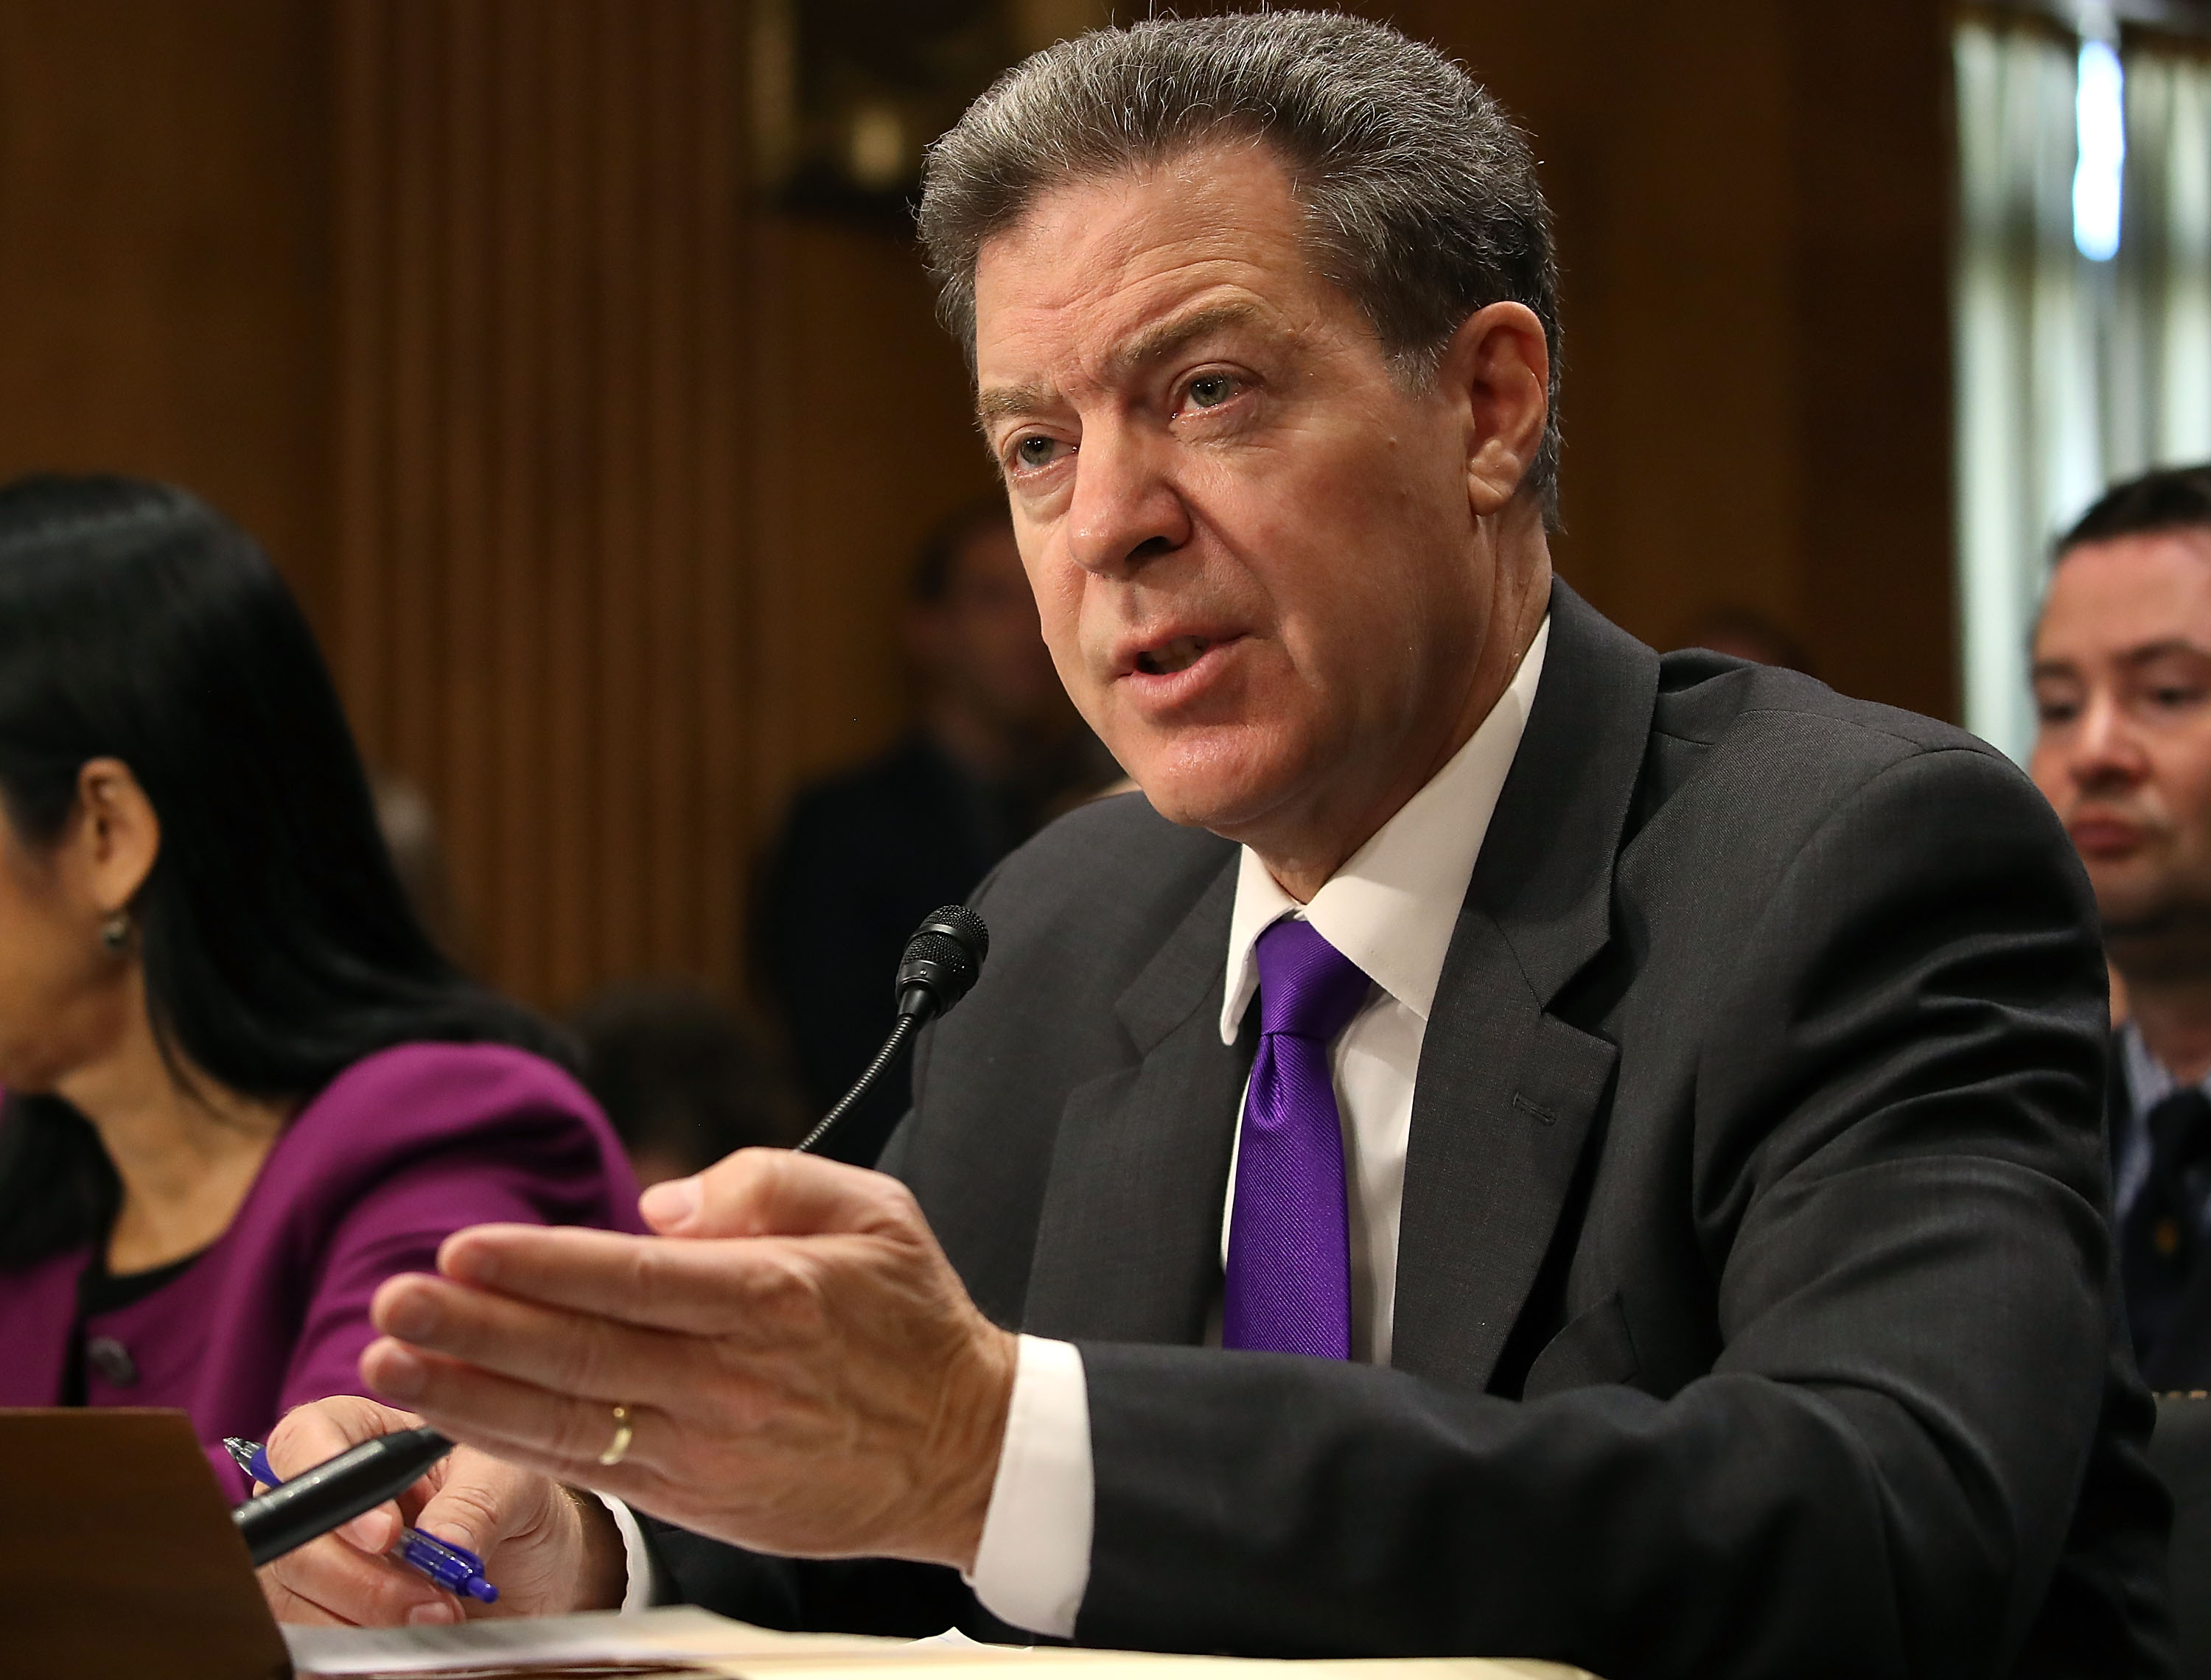 Former US Senator Samuel Dale Brownback (R-KS) testifies during his Senate Foreign Relations Committee confirmation hearing to be ambassador at large for international religious freedom, on Capitol Hill in Washington, DC on Oct. 4, 2017. (Mark Wilson&mdash;Getty Images)